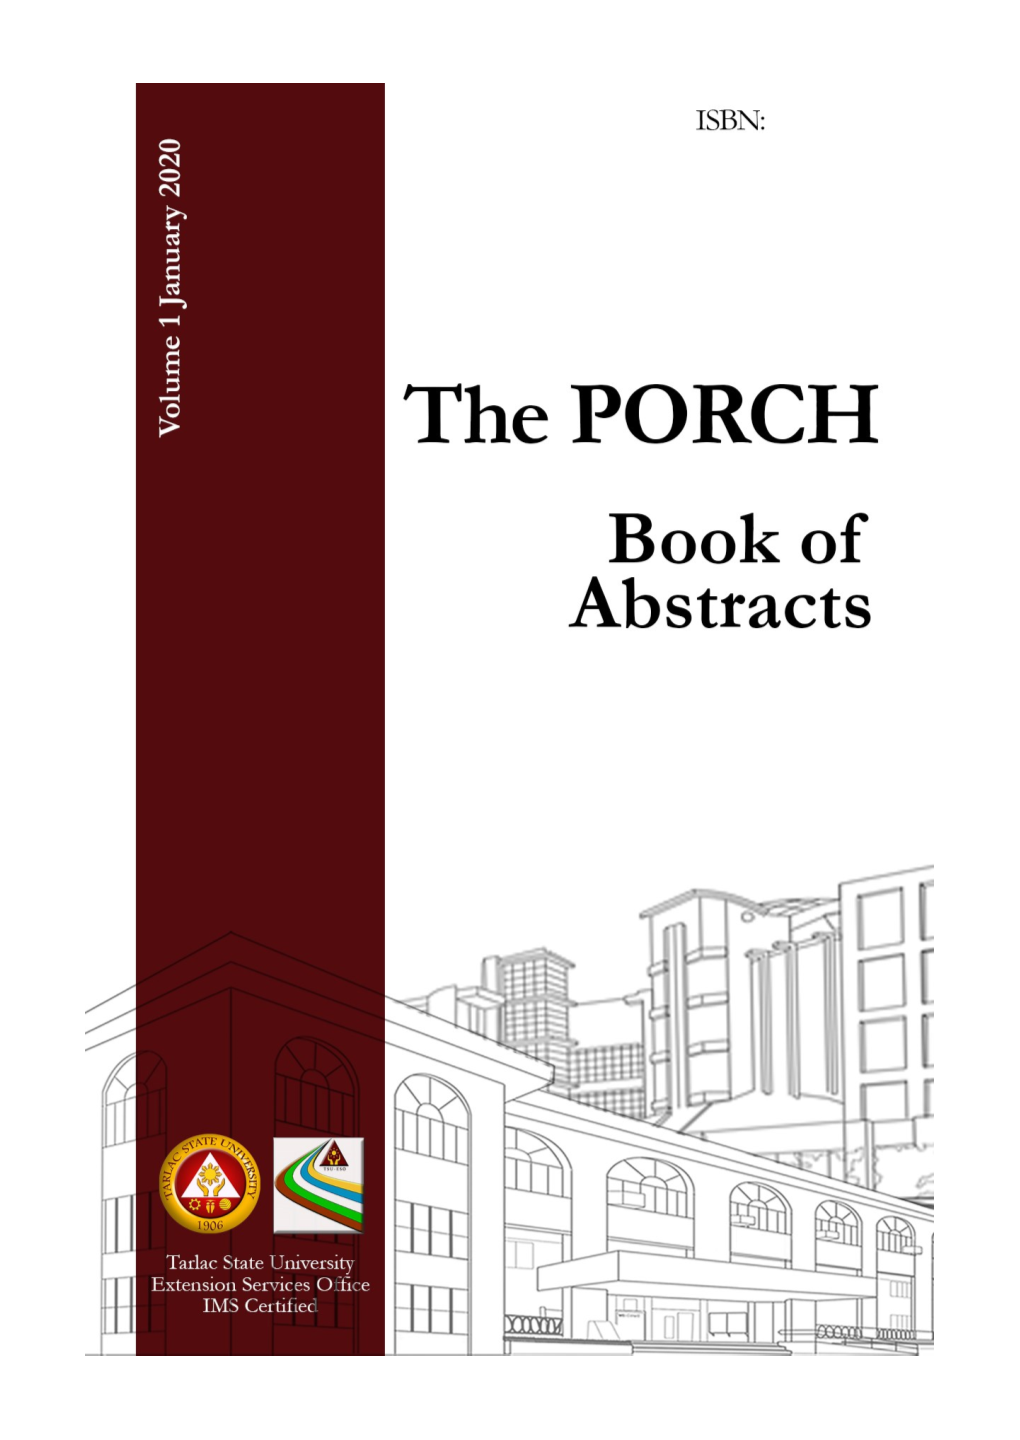 Download the Porch Book of Abstract Volume 2